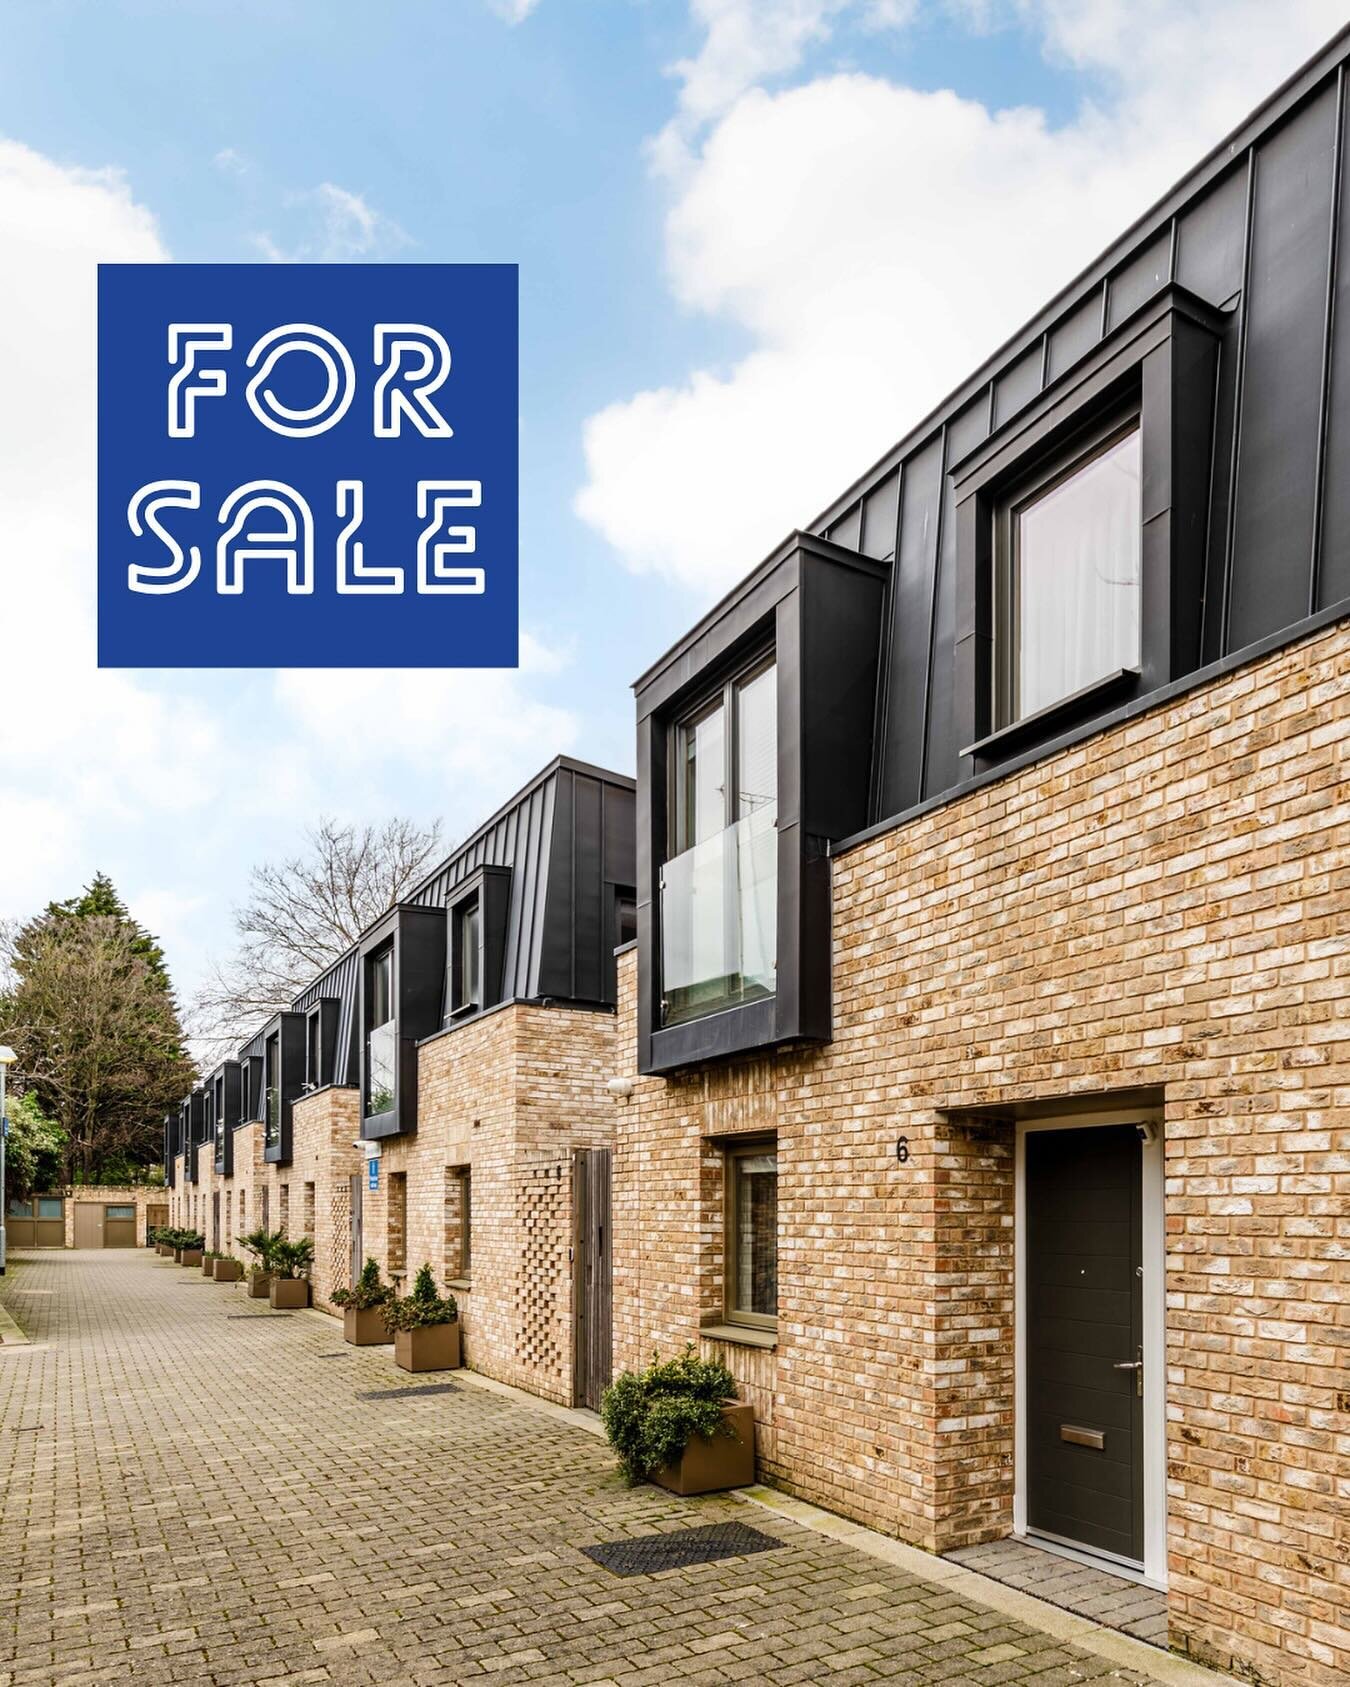 🔵 FOR SALE - Kelvedon Mews, N1 🔵

A rare opportunity to purchase a two bedroom contemporary house in the heart of De Beauvoir with a south facing patio on a quiet pedestrian mews.

🔹 Full listing via the link in the bio

Get in contact to arrange 